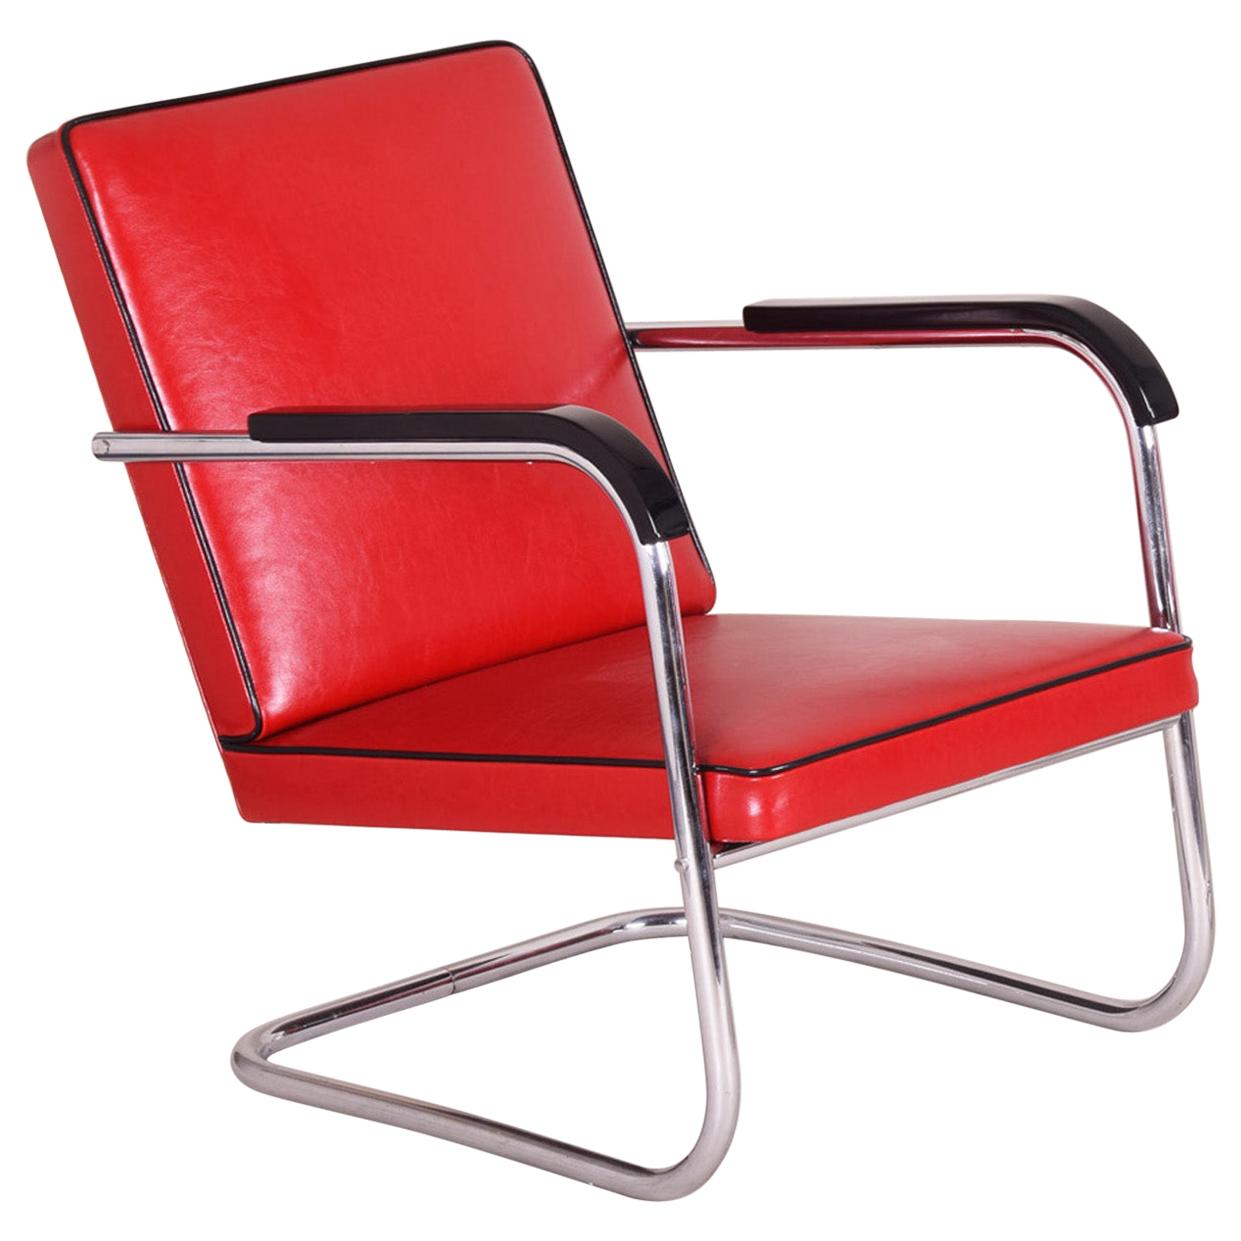 Red Tubular Thonet Armchair by Anton Lorenz, New Leather Upholstery, 1930s